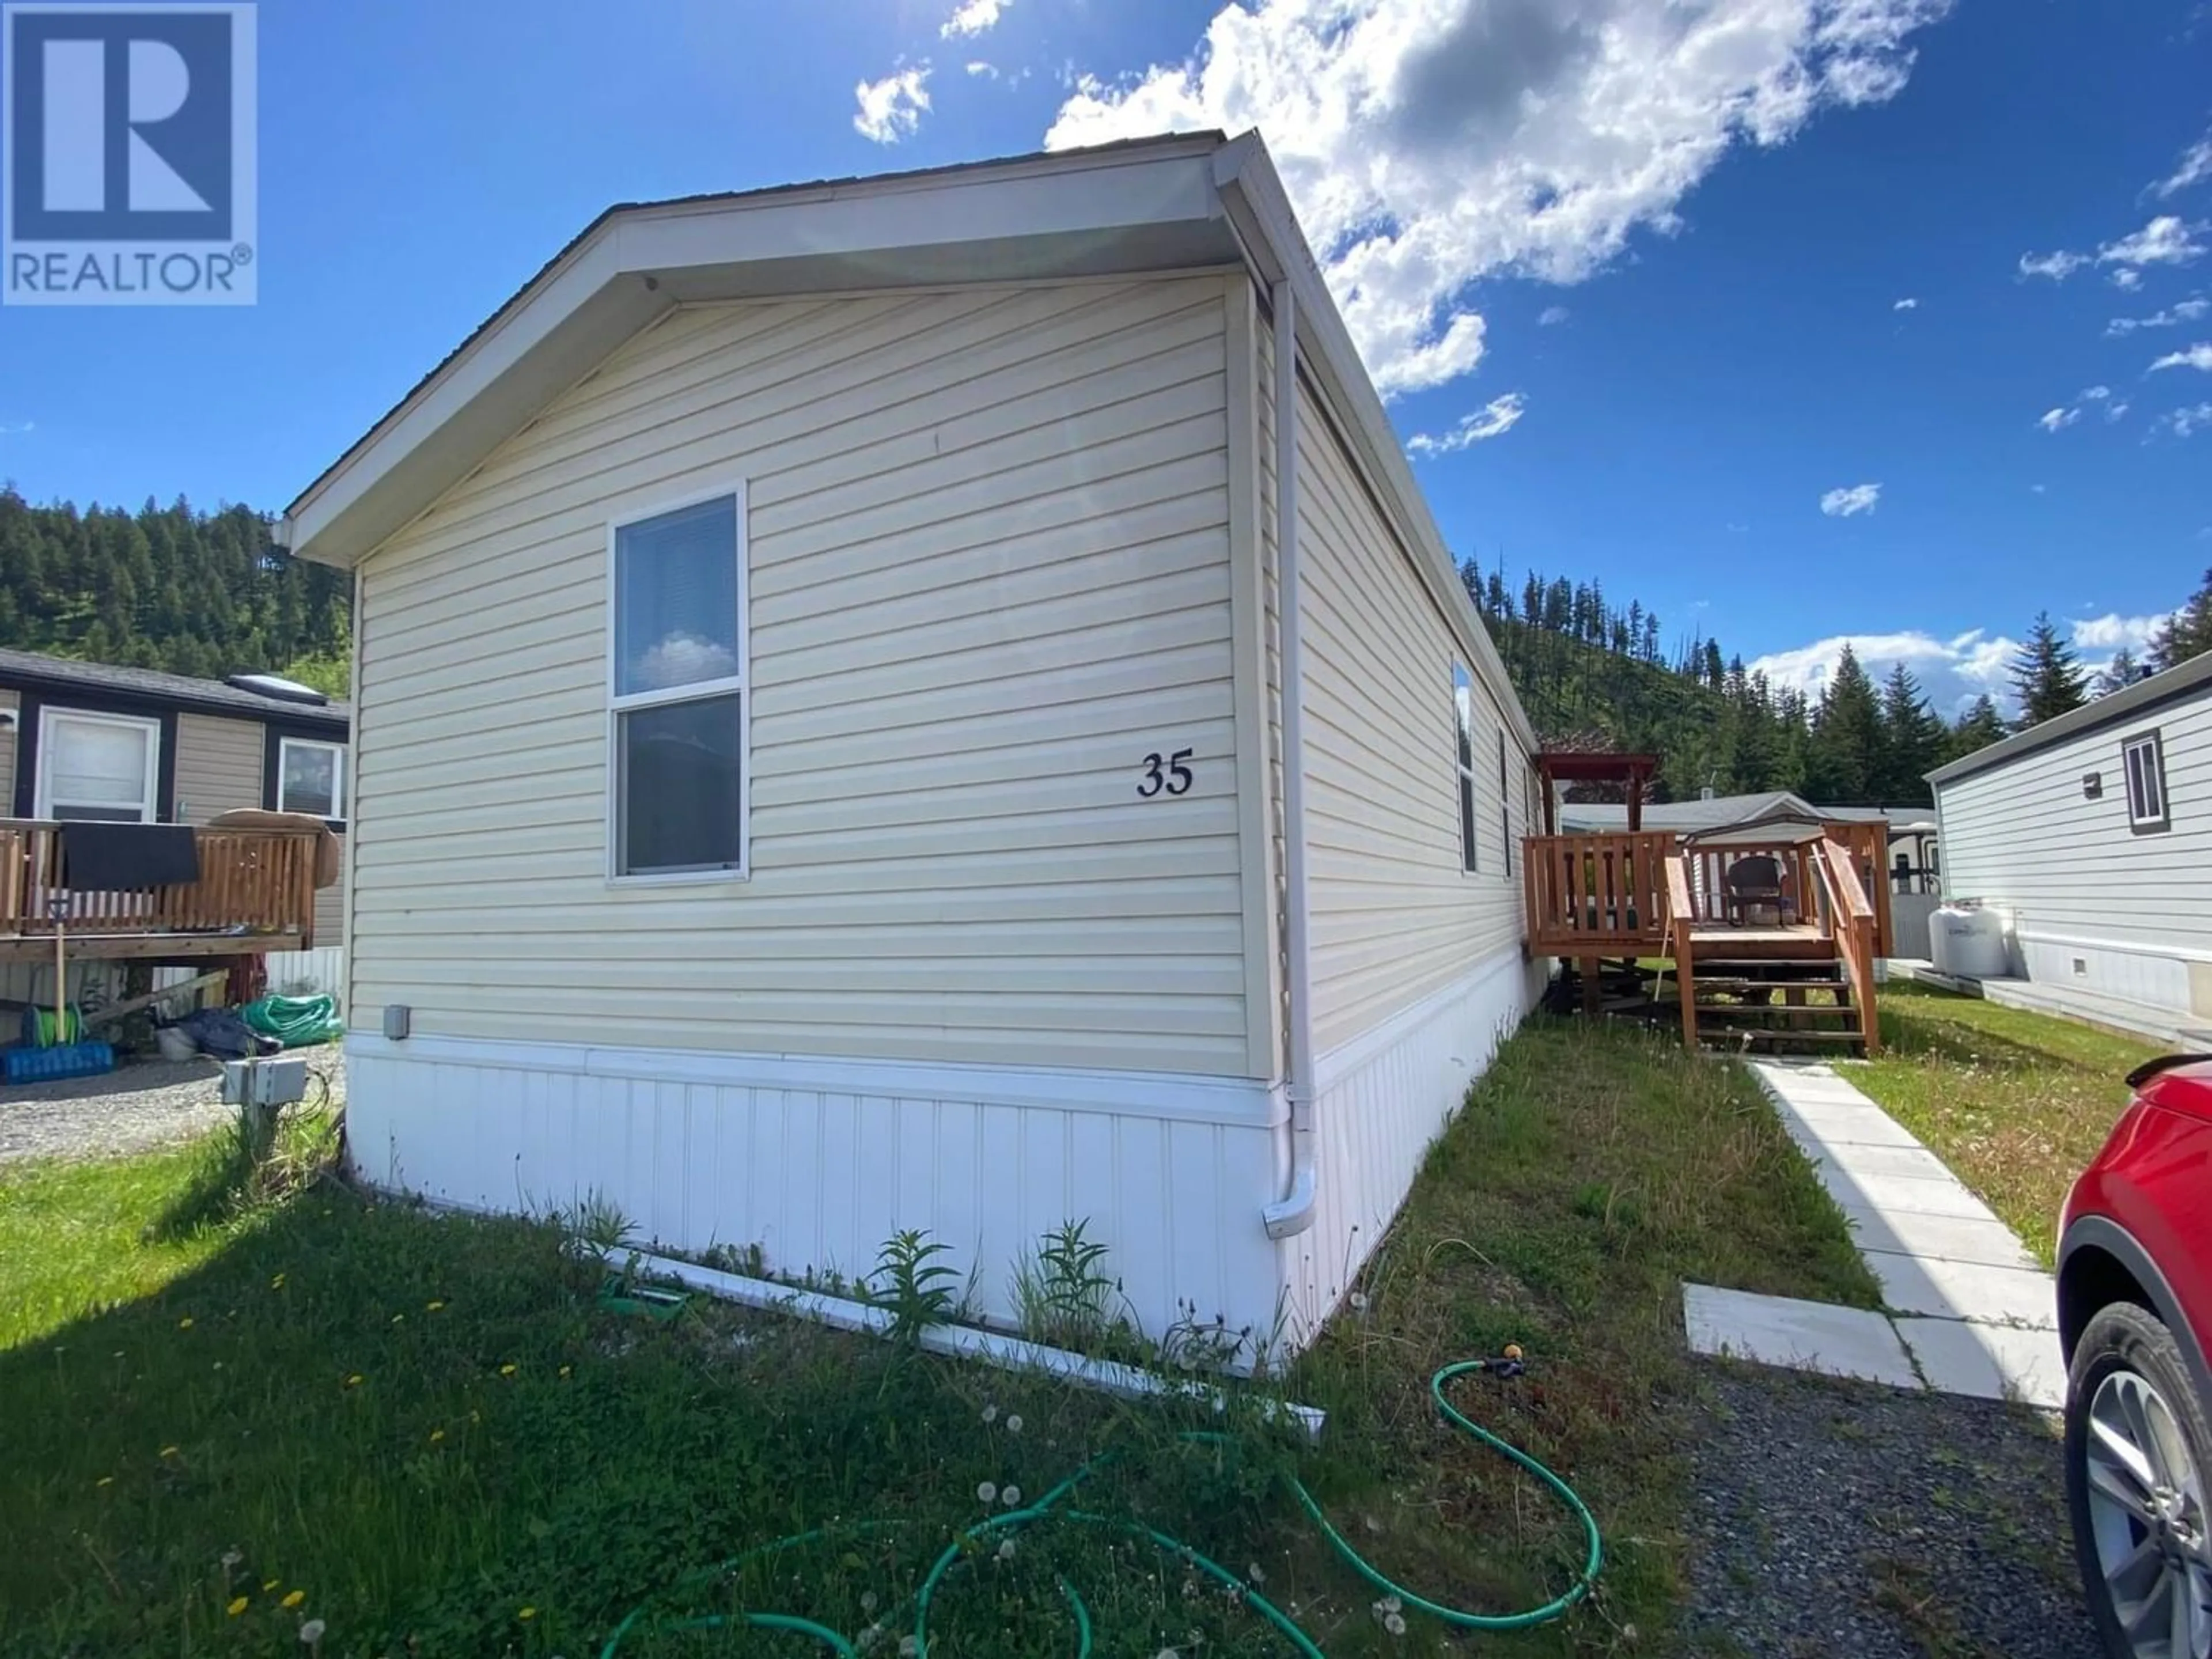 Home with vinyl exterior material for 35-4510 POWER ROAD, Barriere British Columbia V0E1E0